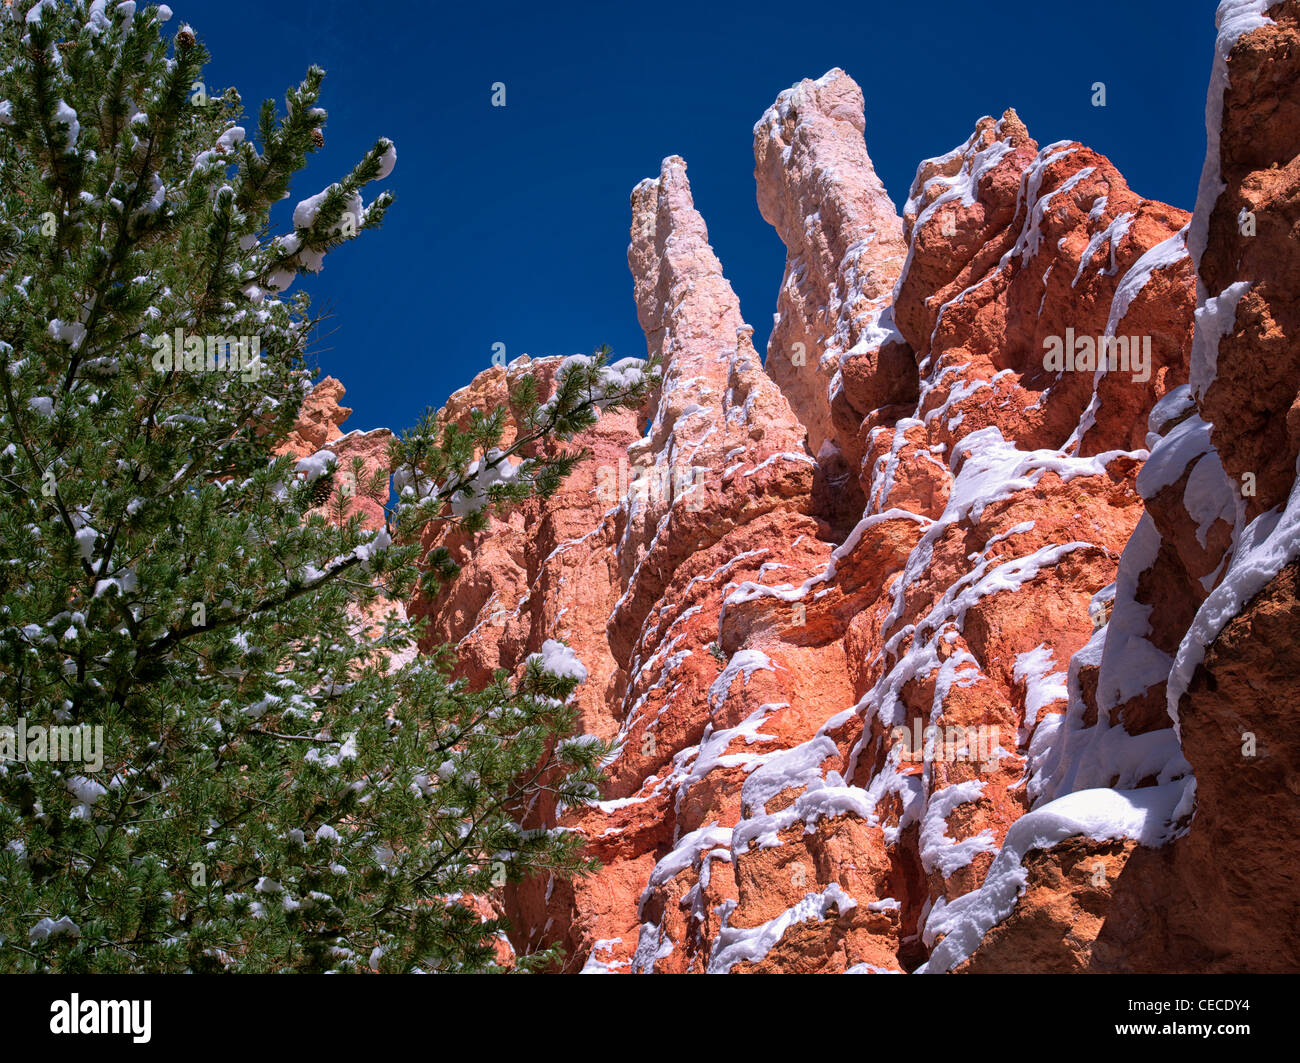 Snow in Bryce Canyon National Park, Utah Stock Photo